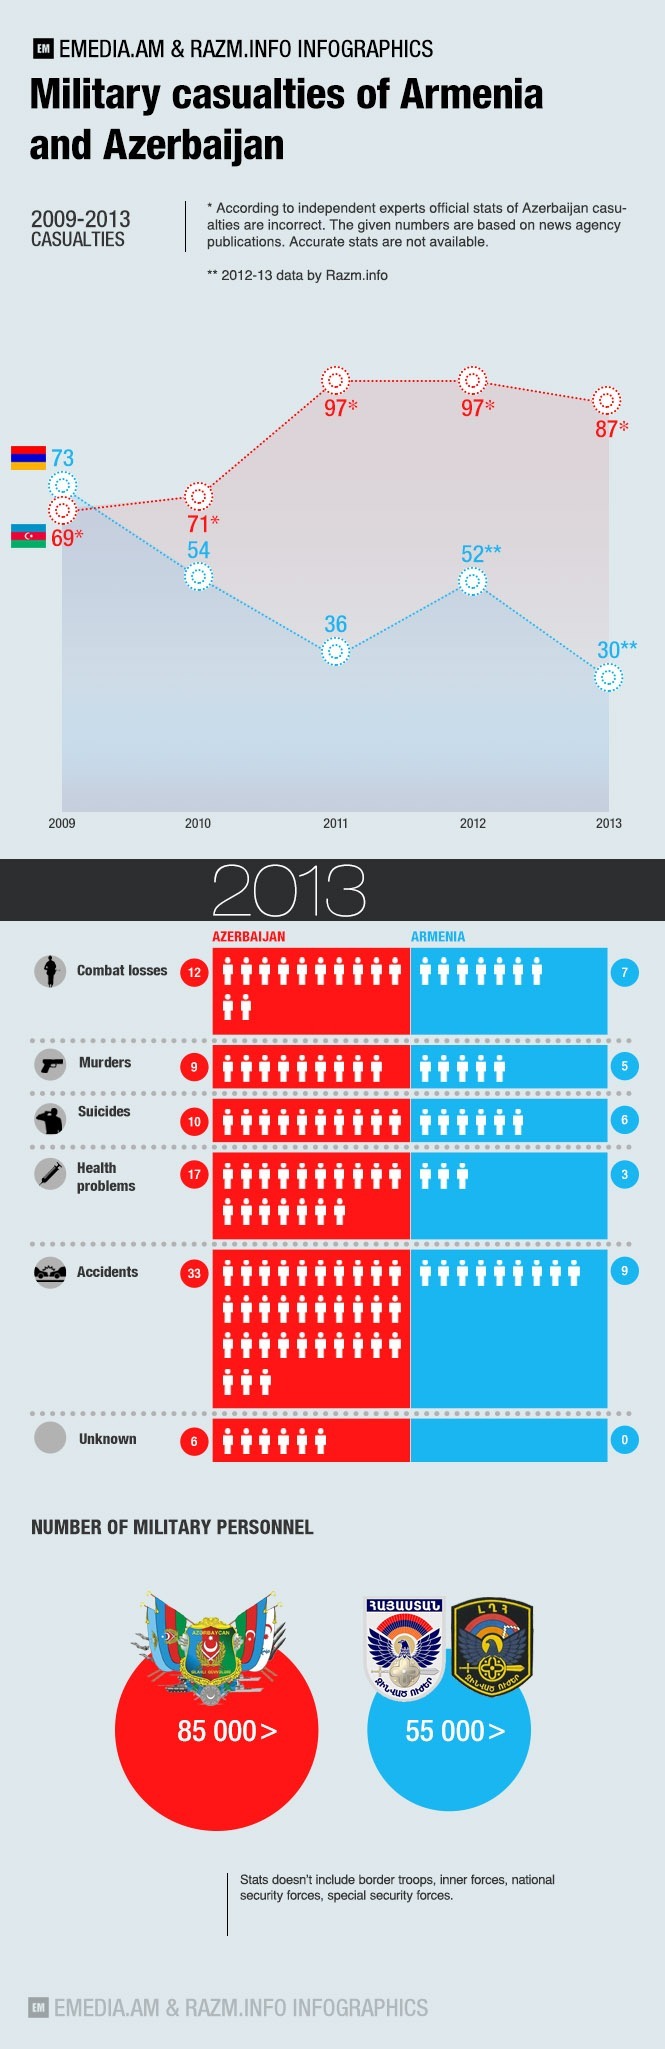 infographic: Military casualties of Armenia and Azerbaijan in 2013